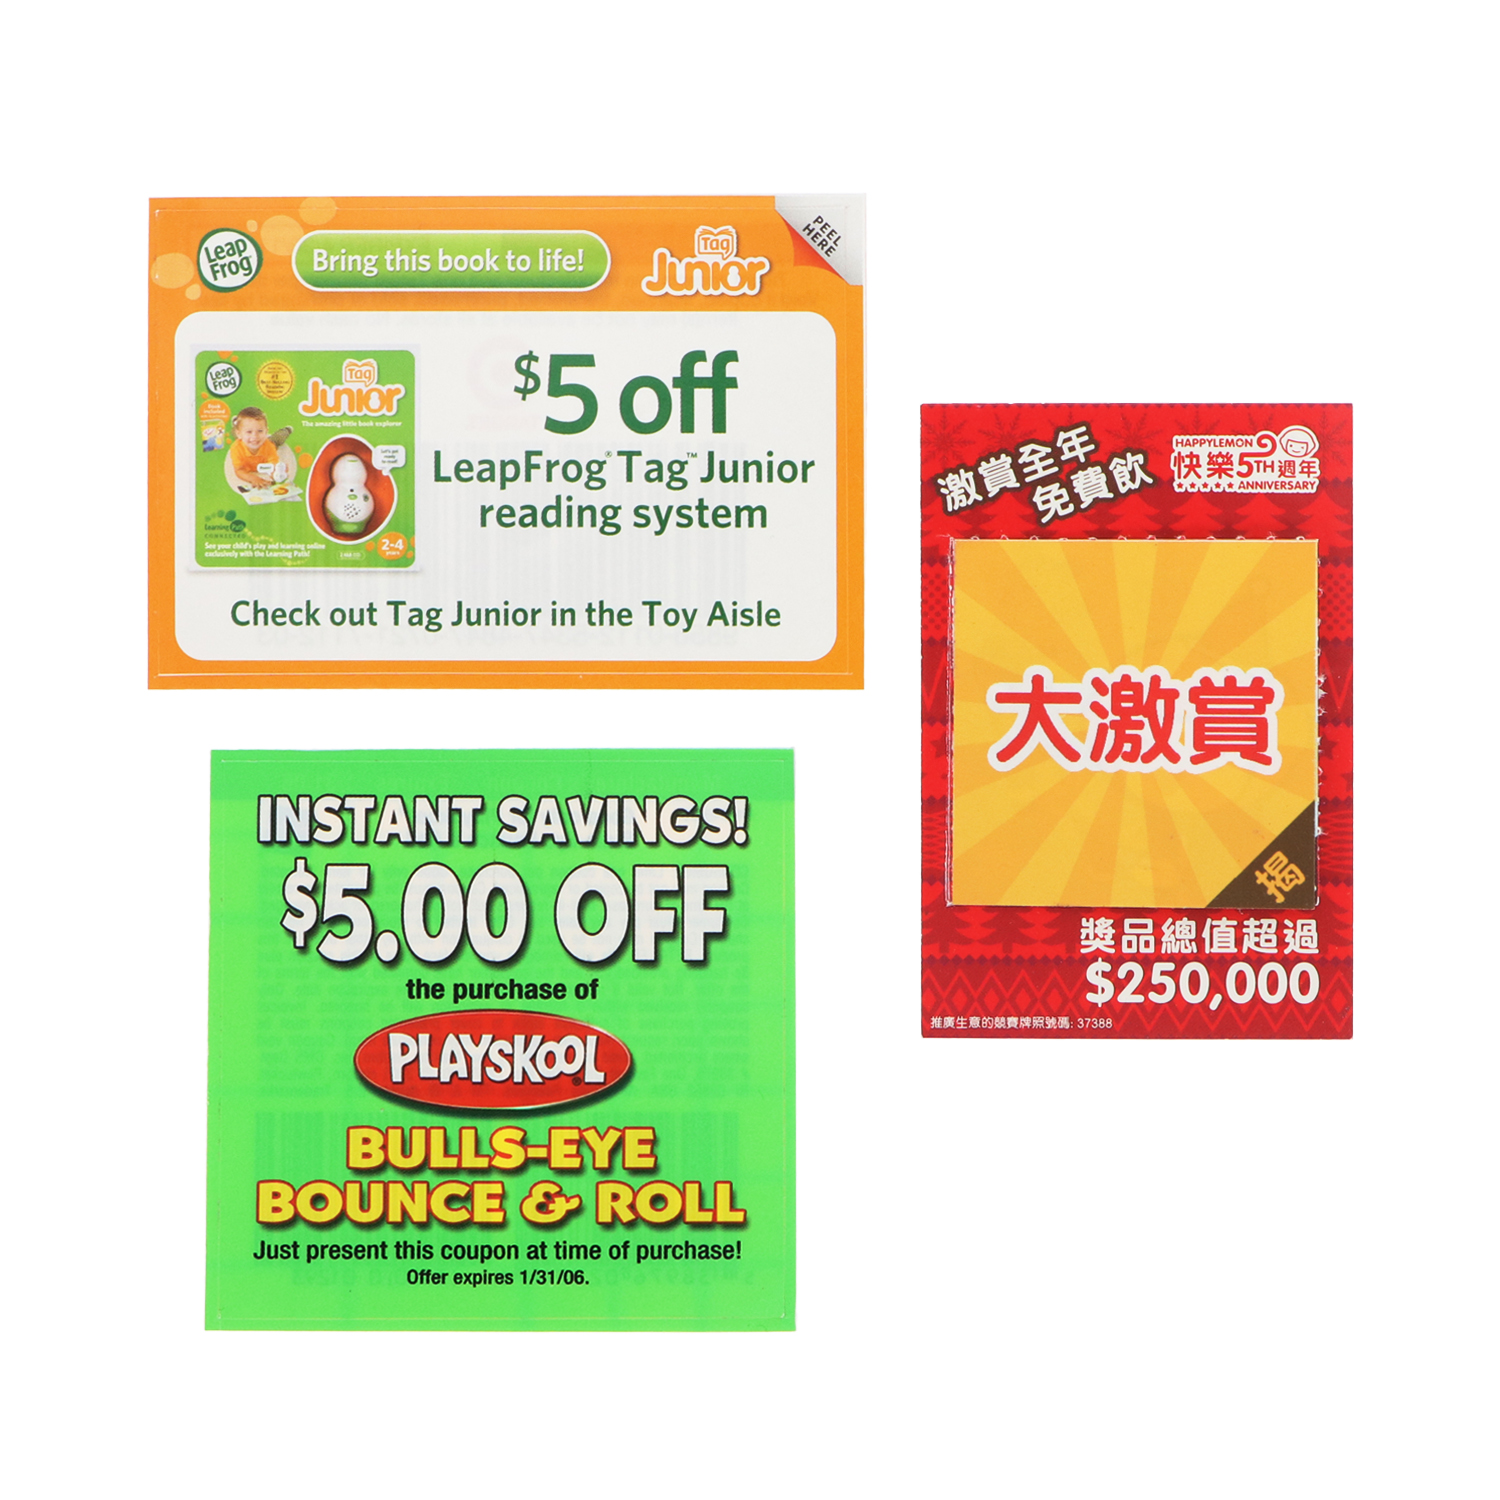 Customized Coupons and Instant Redeemable Coupons for Advertising and Promotion Campaigns